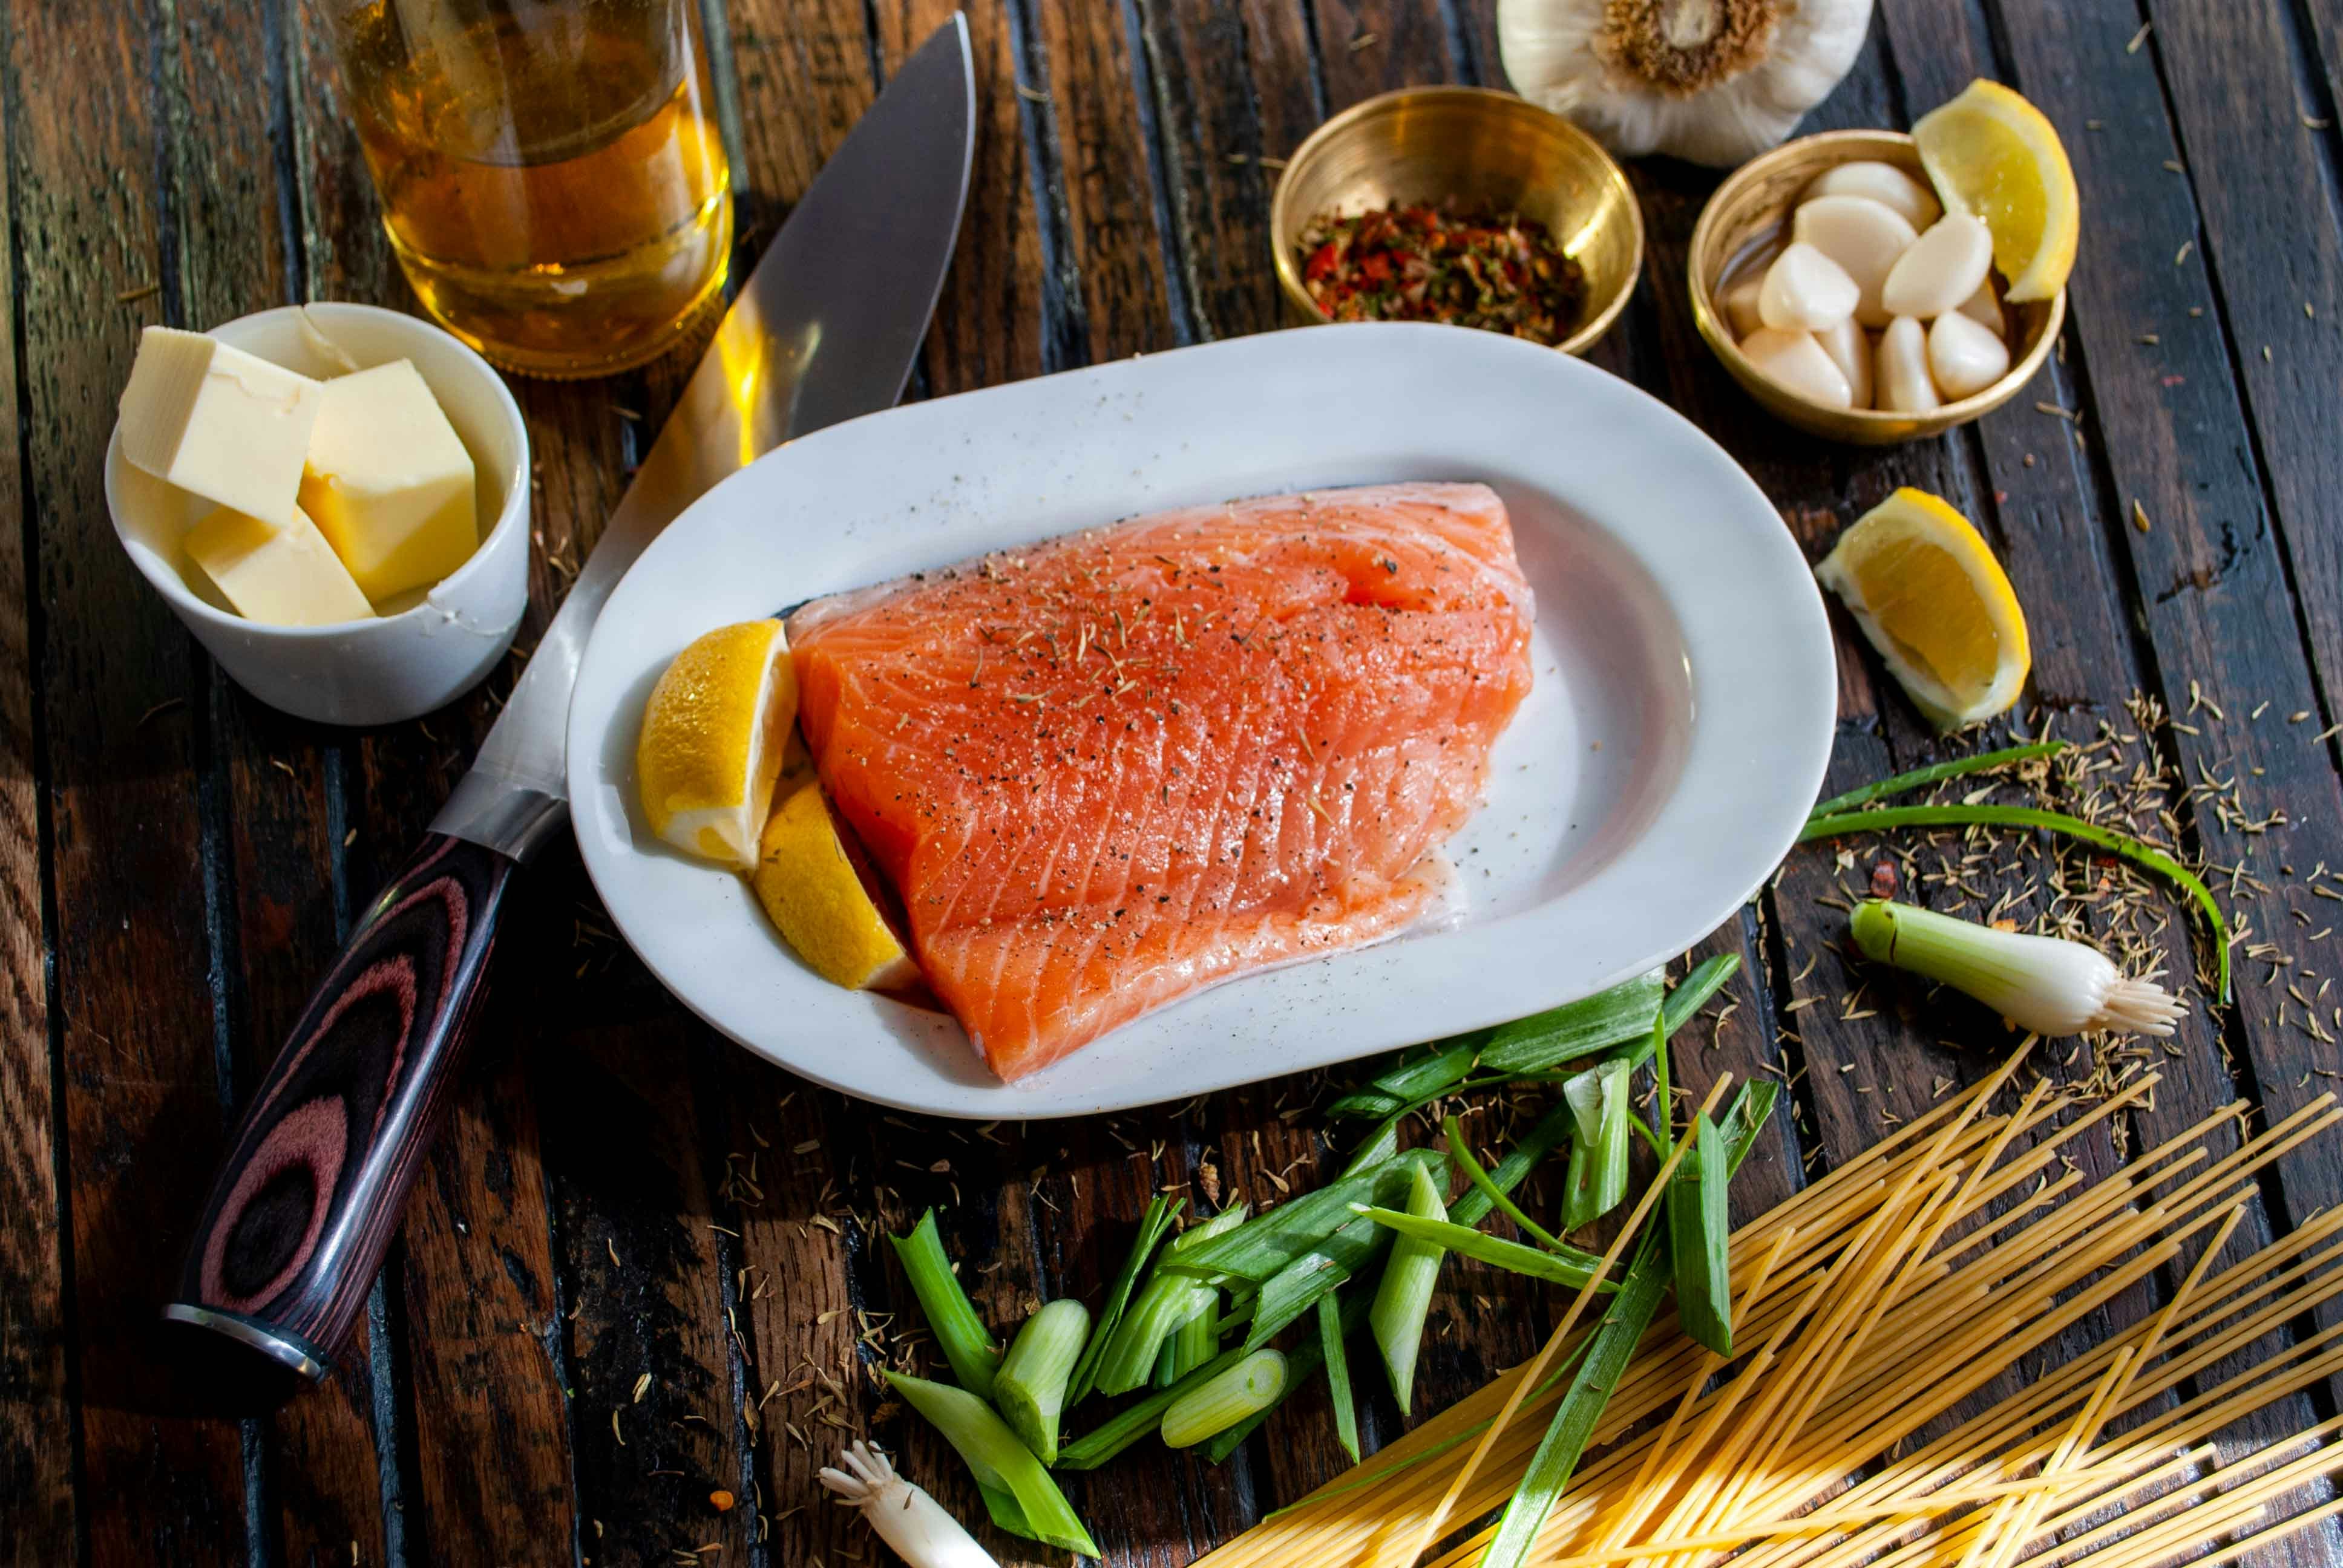 Raw Salmon and ingredients for meal preparation